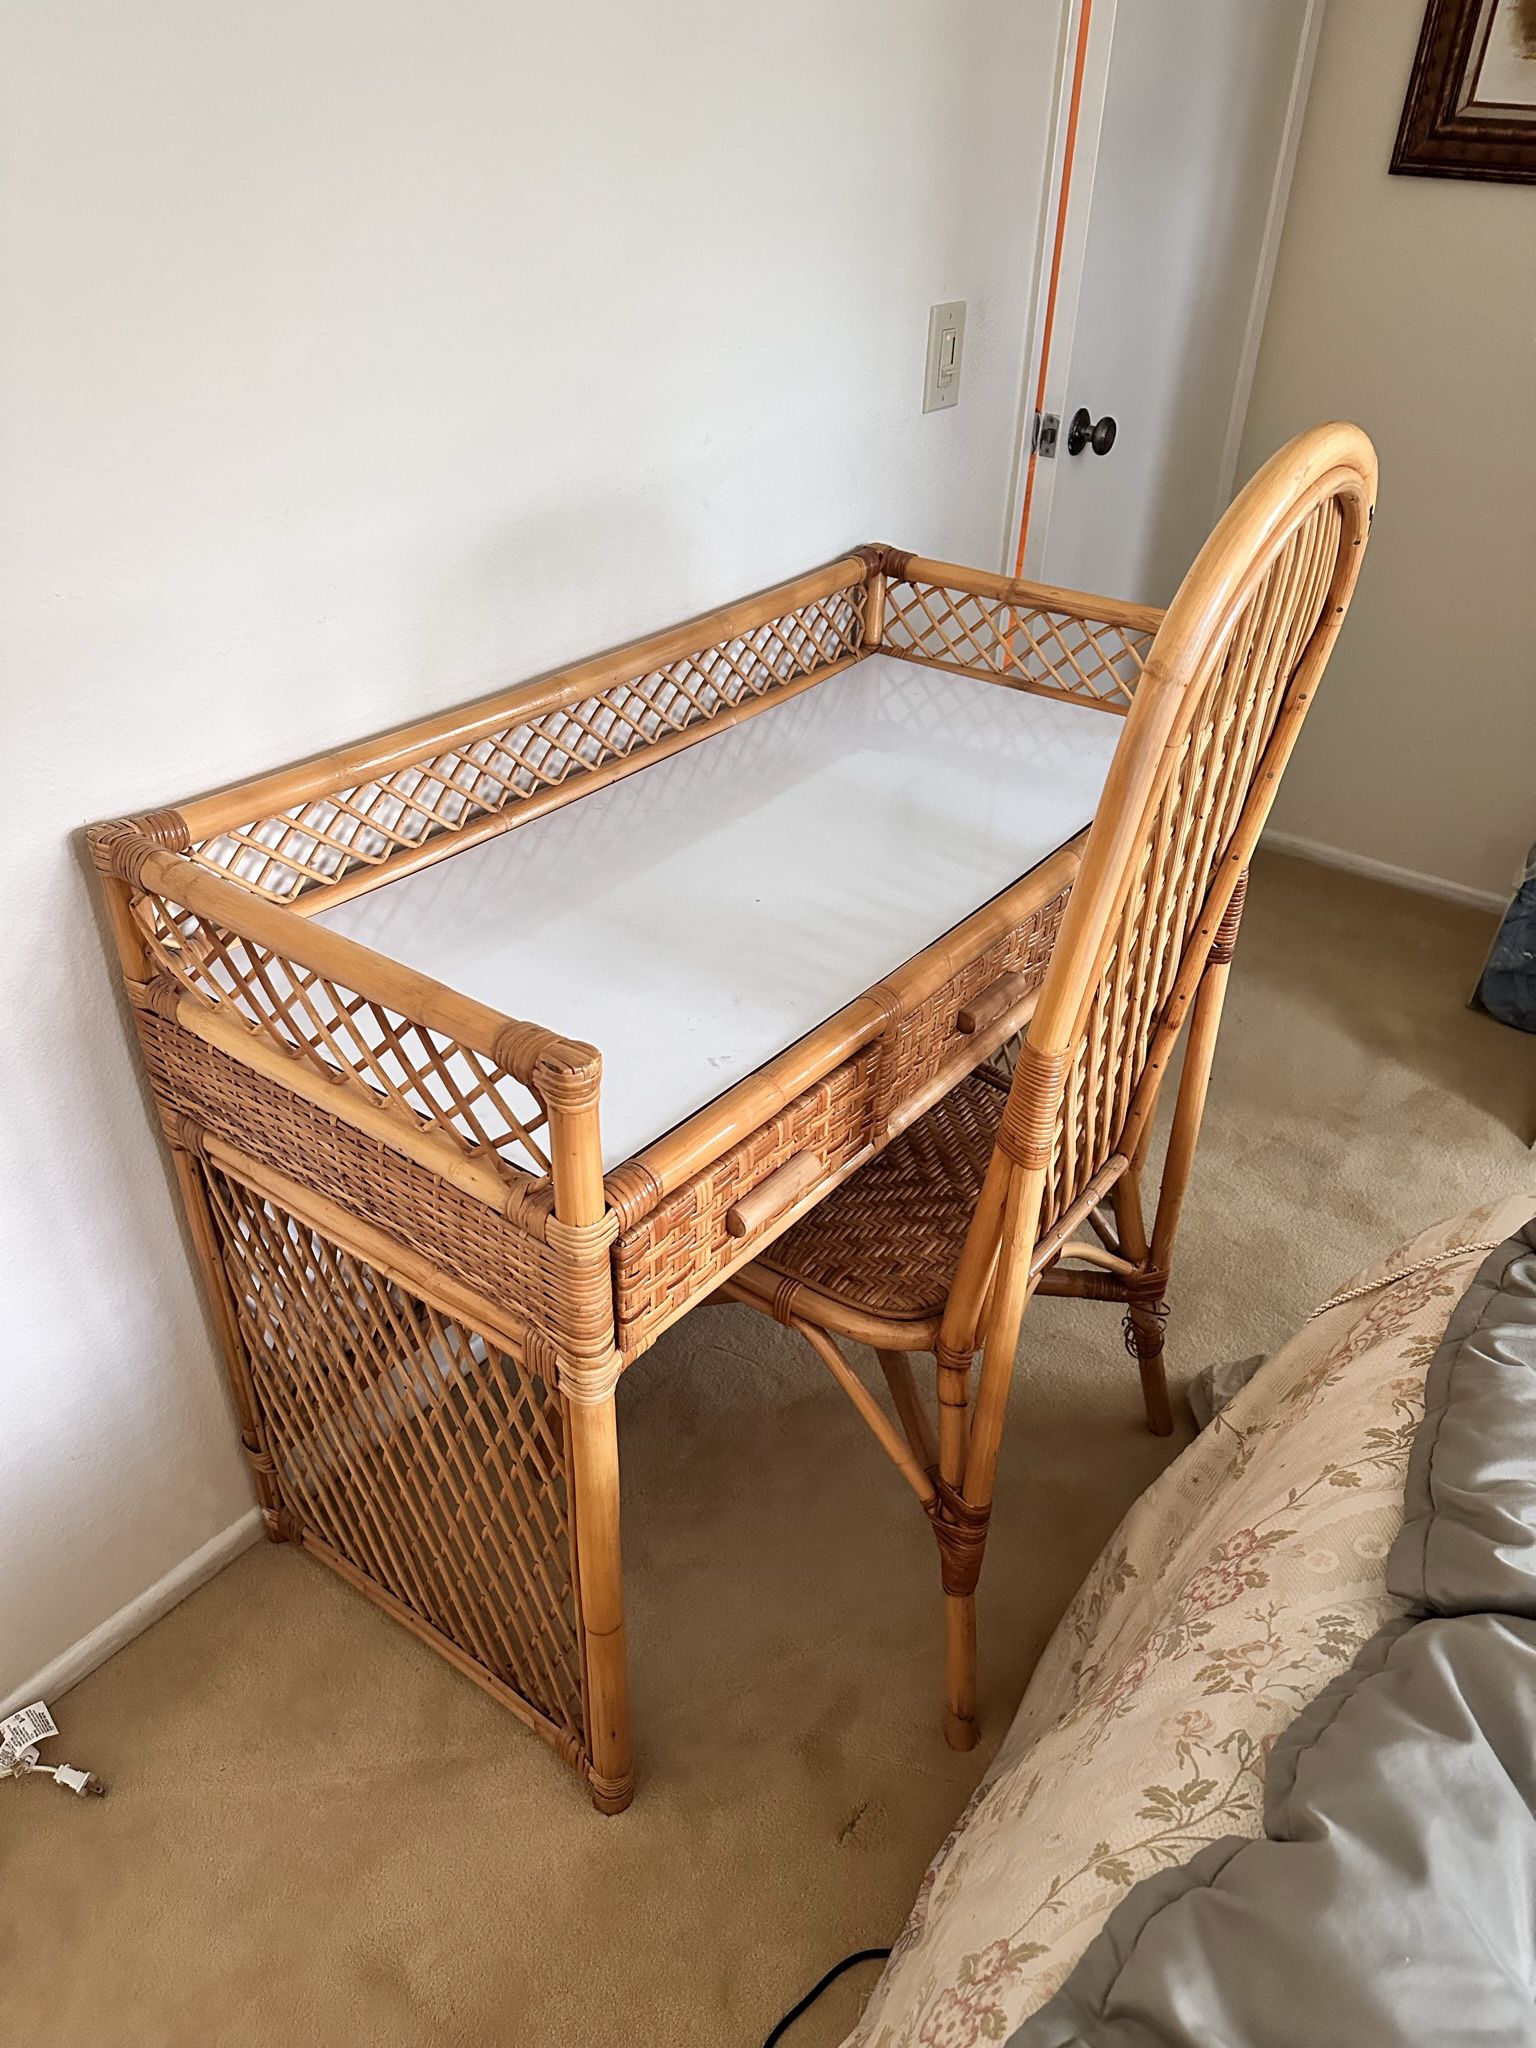 ** VINTAGE RATTAN/BAMBOO DESK AND CHAIR**